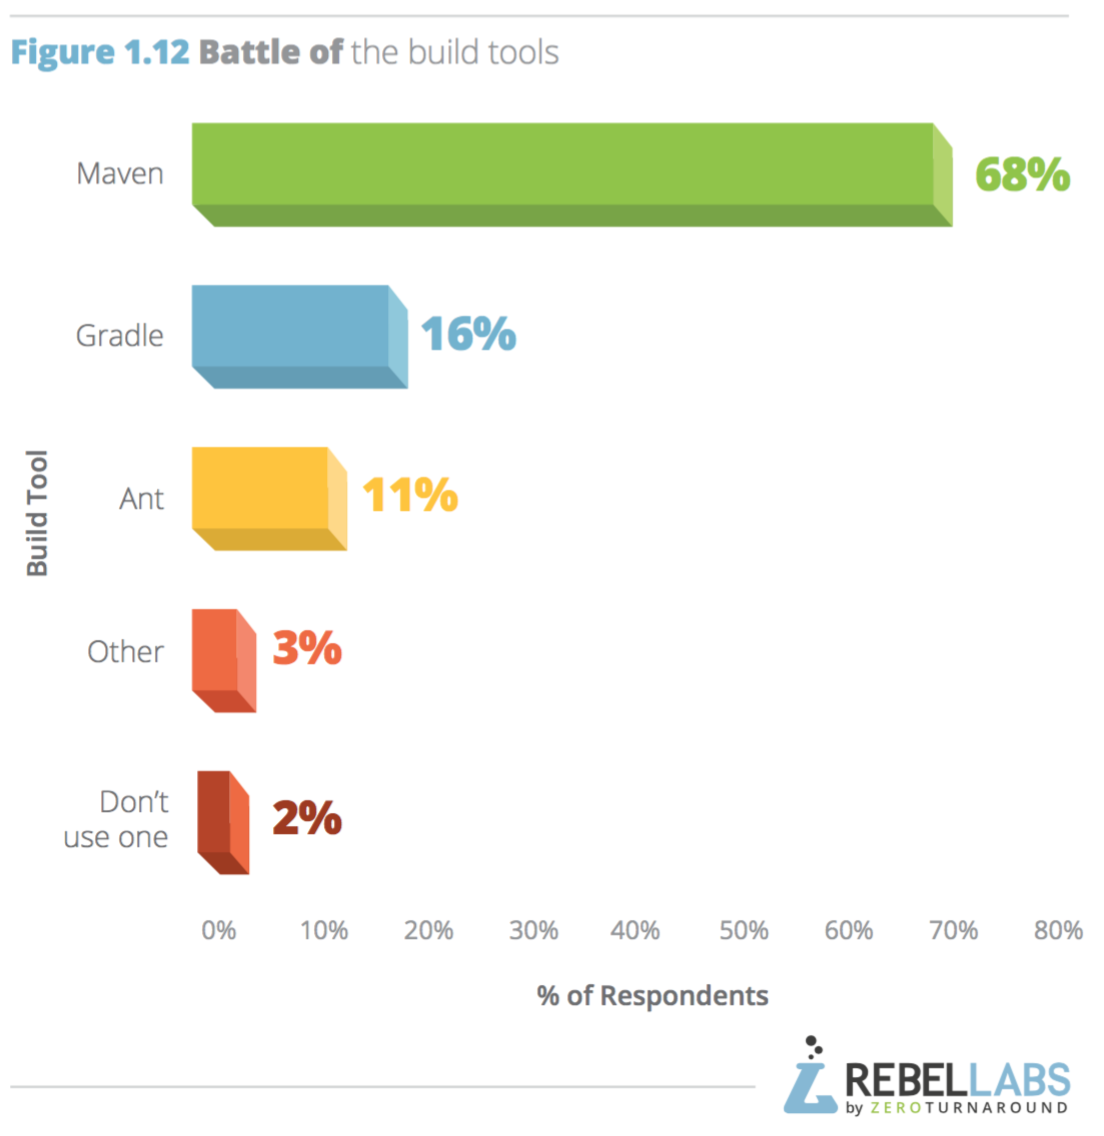 bar graph showing which build tools are used most often by respondents